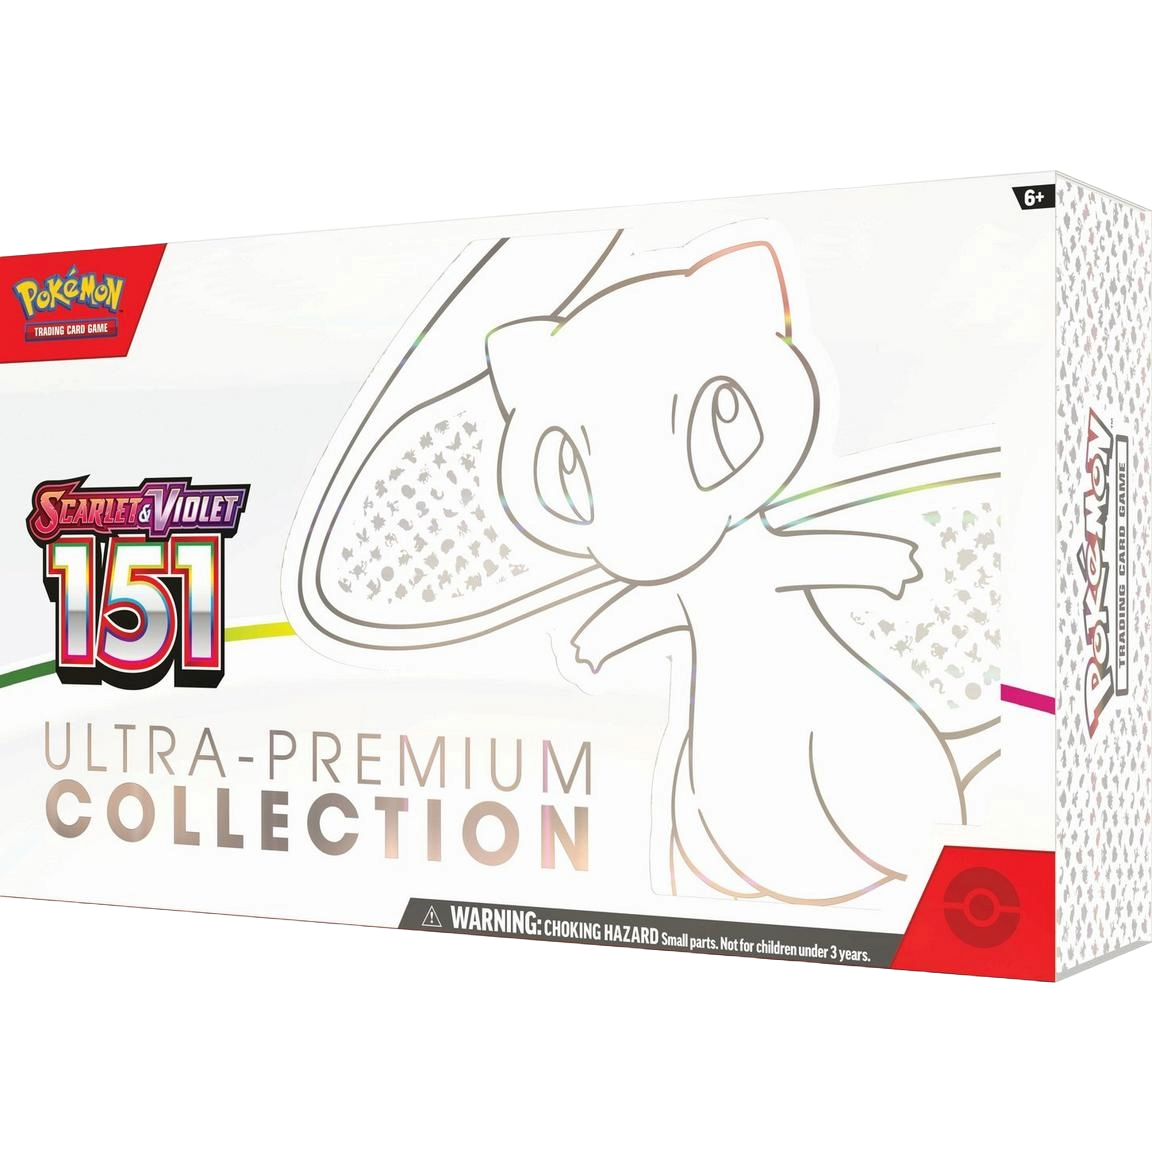 Pokémon TCG: Scarlet & Violet - 151 Collection - Ultra Premium Collection (Order 4 for Factory Sealed Case)